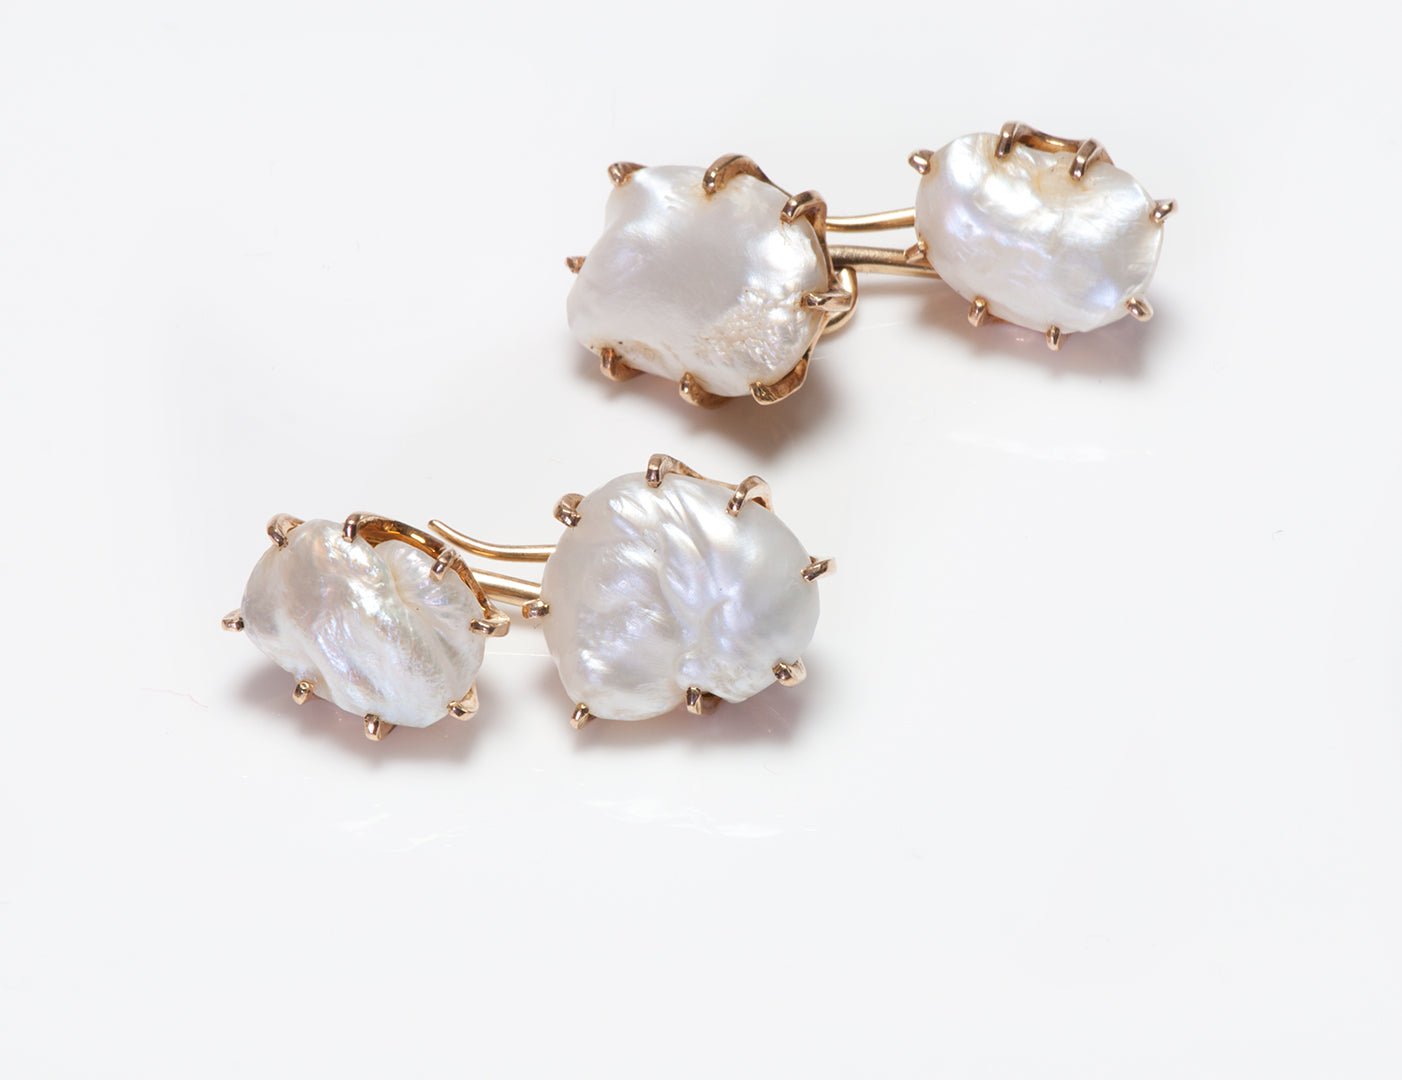 Antique Gold Fresh Water Pearl Cufflinks - DSF Antique Jewelry